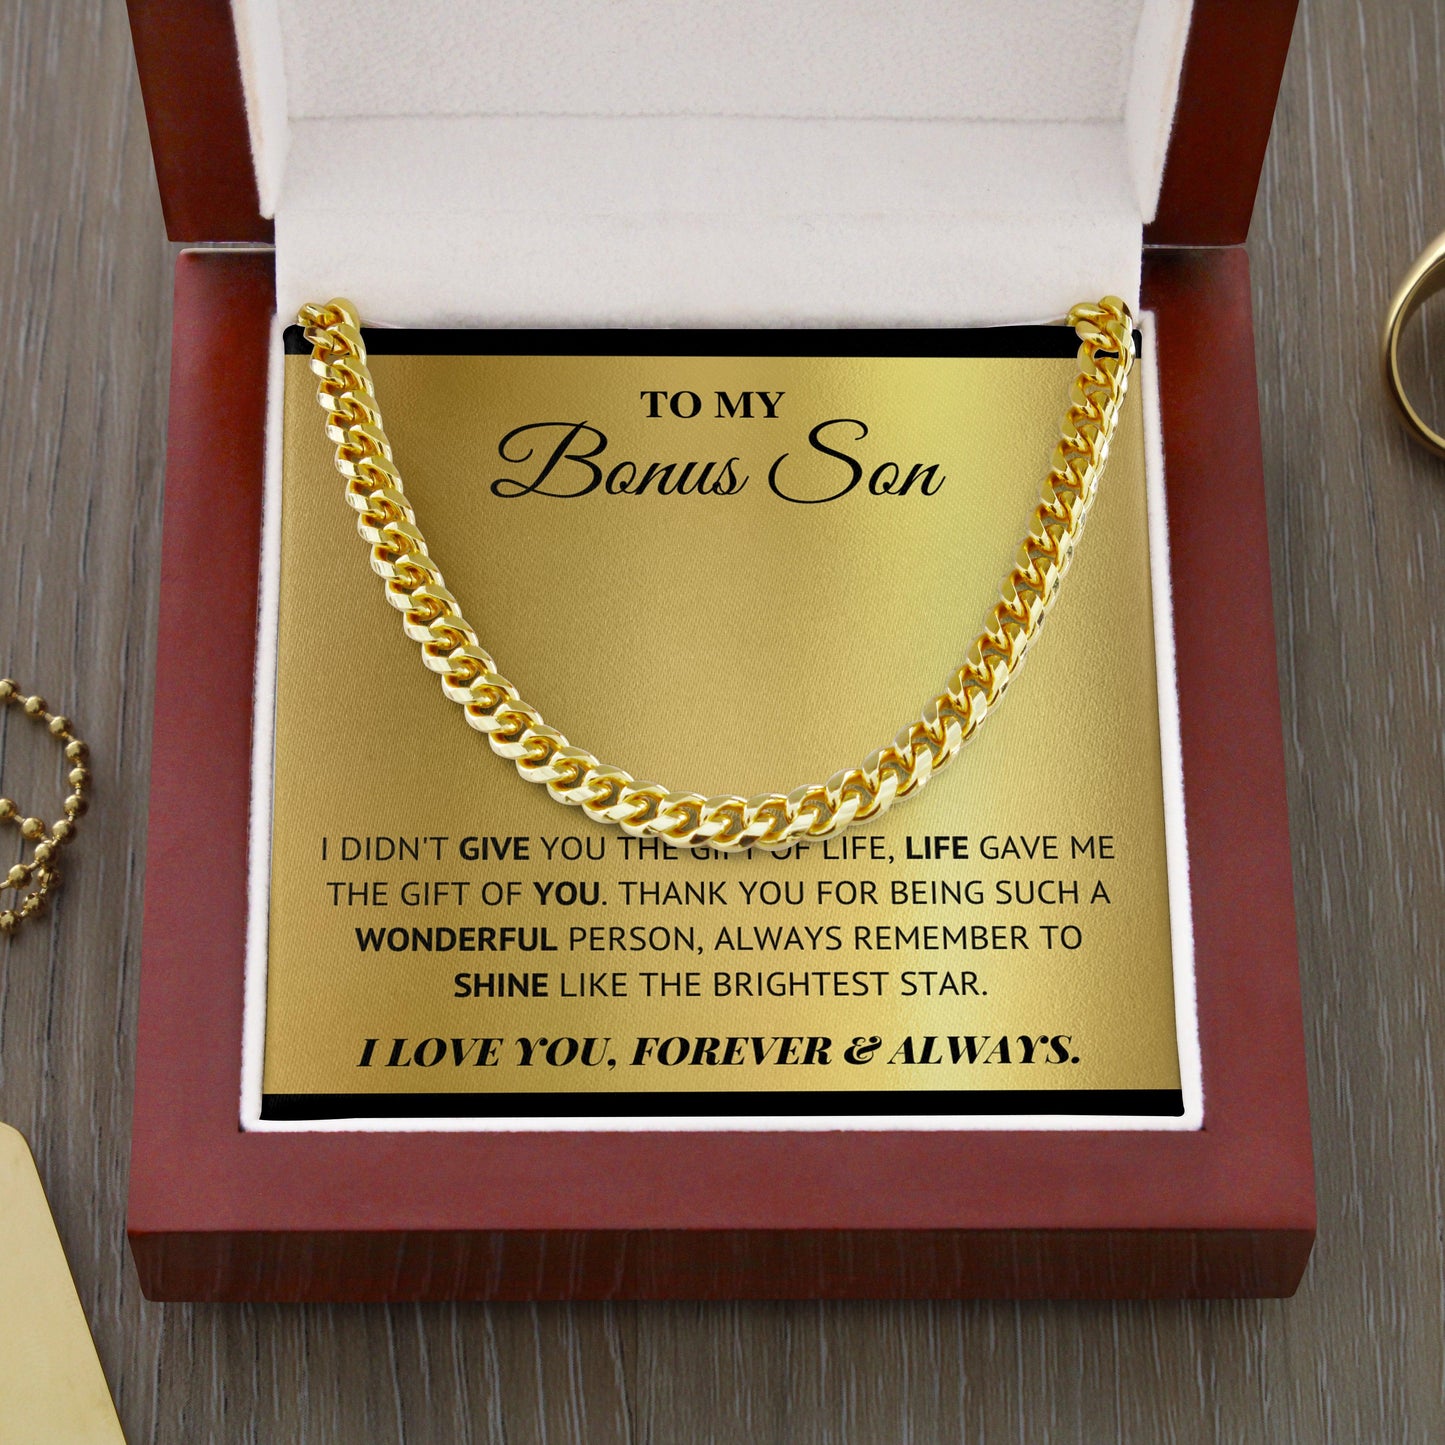 Jewelry gifts Bonus Son -Wonderful Person - Cuban Link Chain - Belesmé - Memorable Jewelry Gifts 